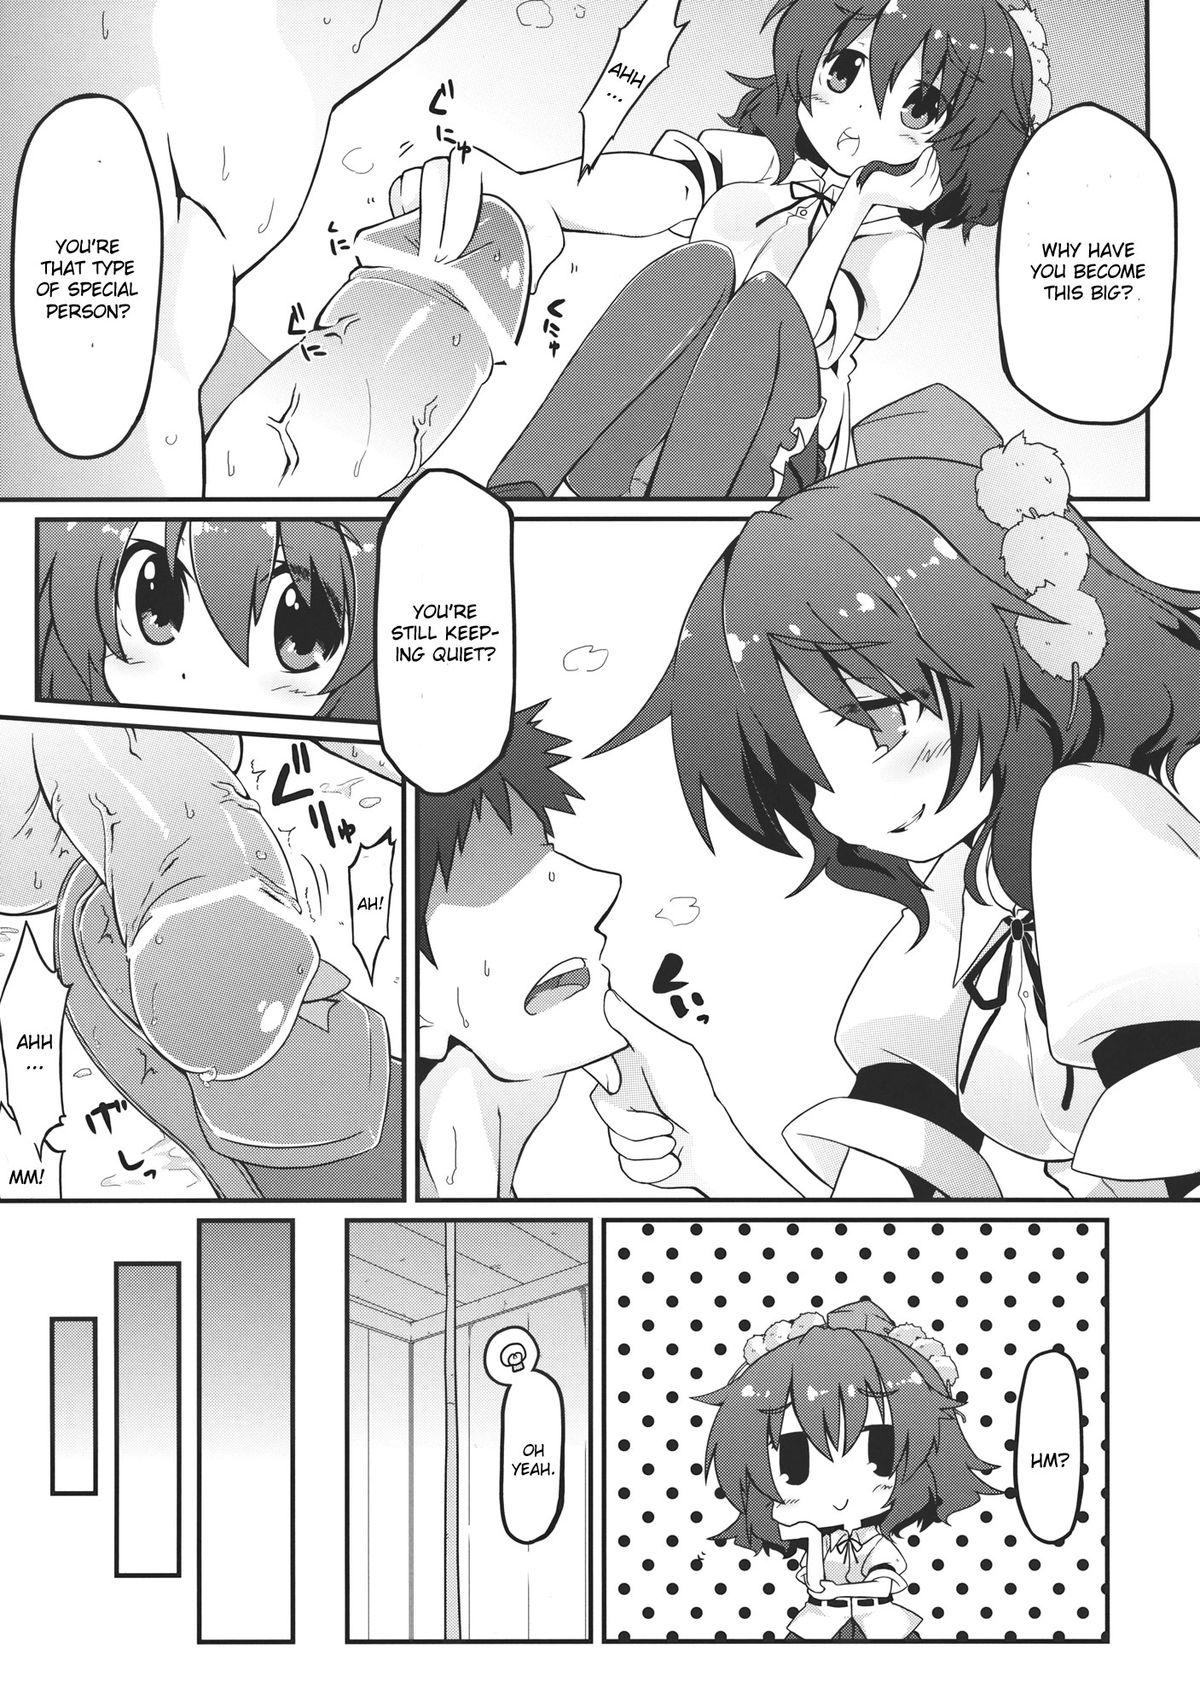 Curves aya-style - Touhou project Muslim - Page 11